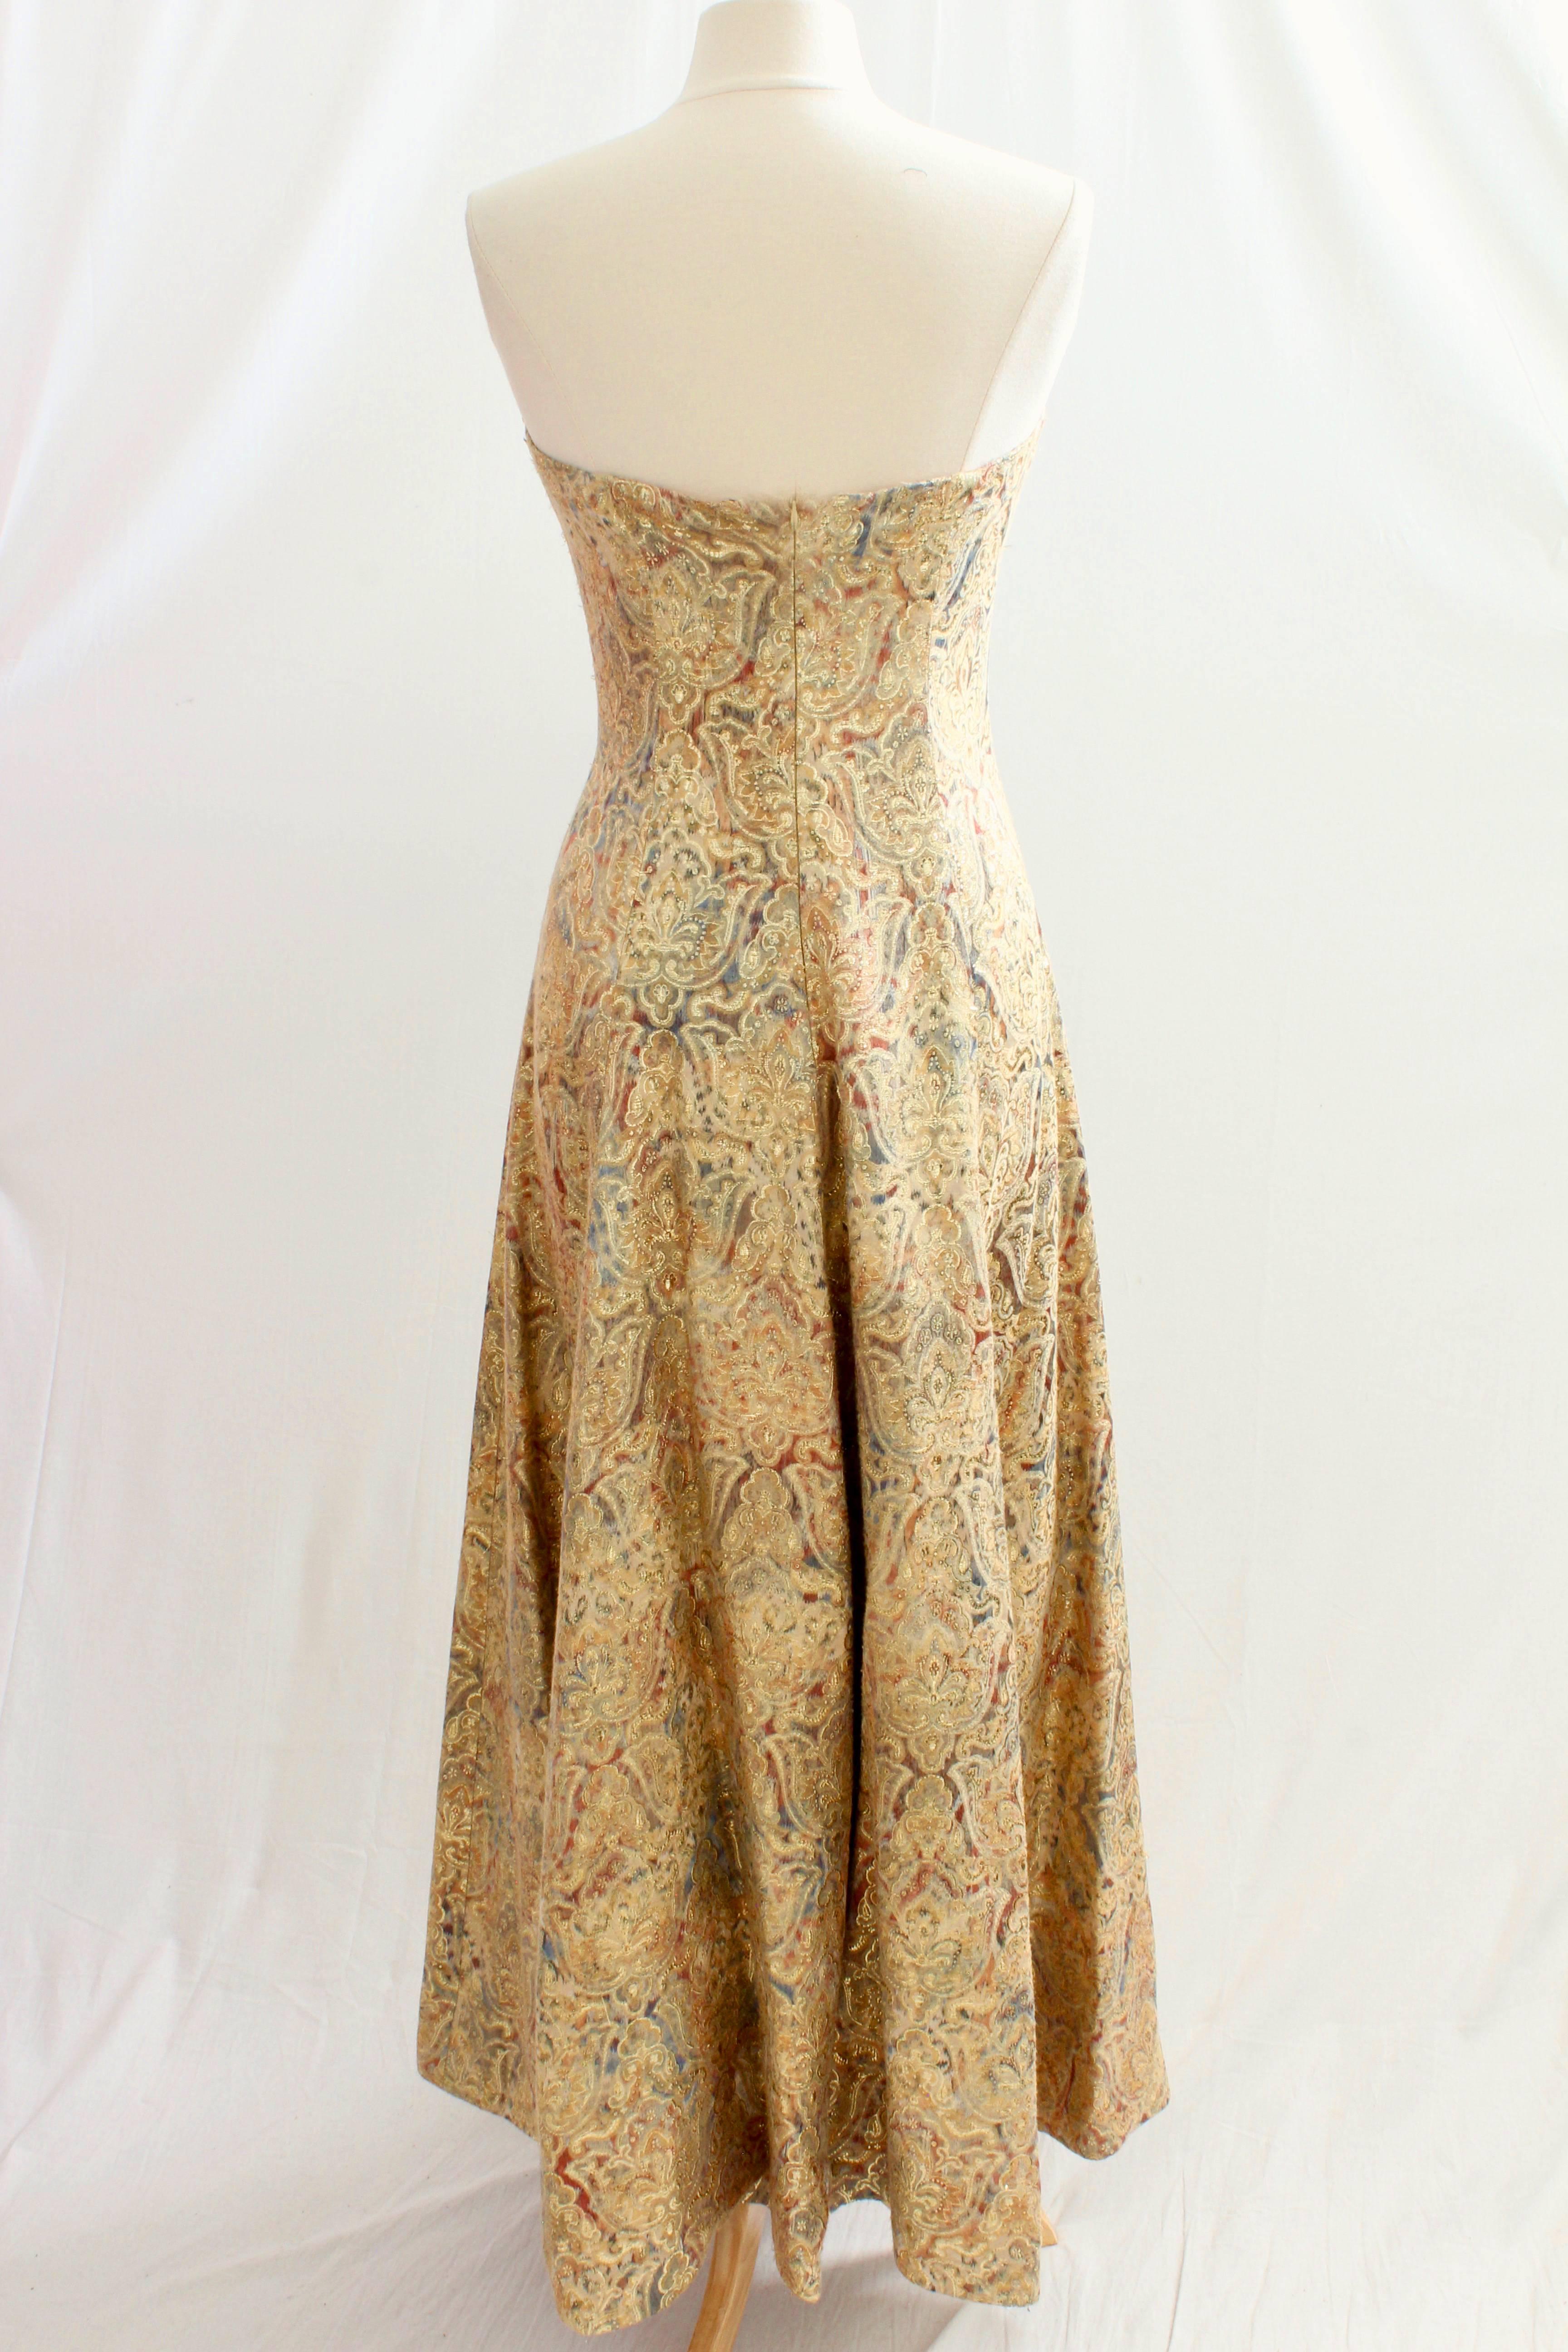 Victor Costa for Neiman Marcus Gold Brocade Evening Gown Strapless Full Length 8 In Good Condition In Port Saint Lucie, FL